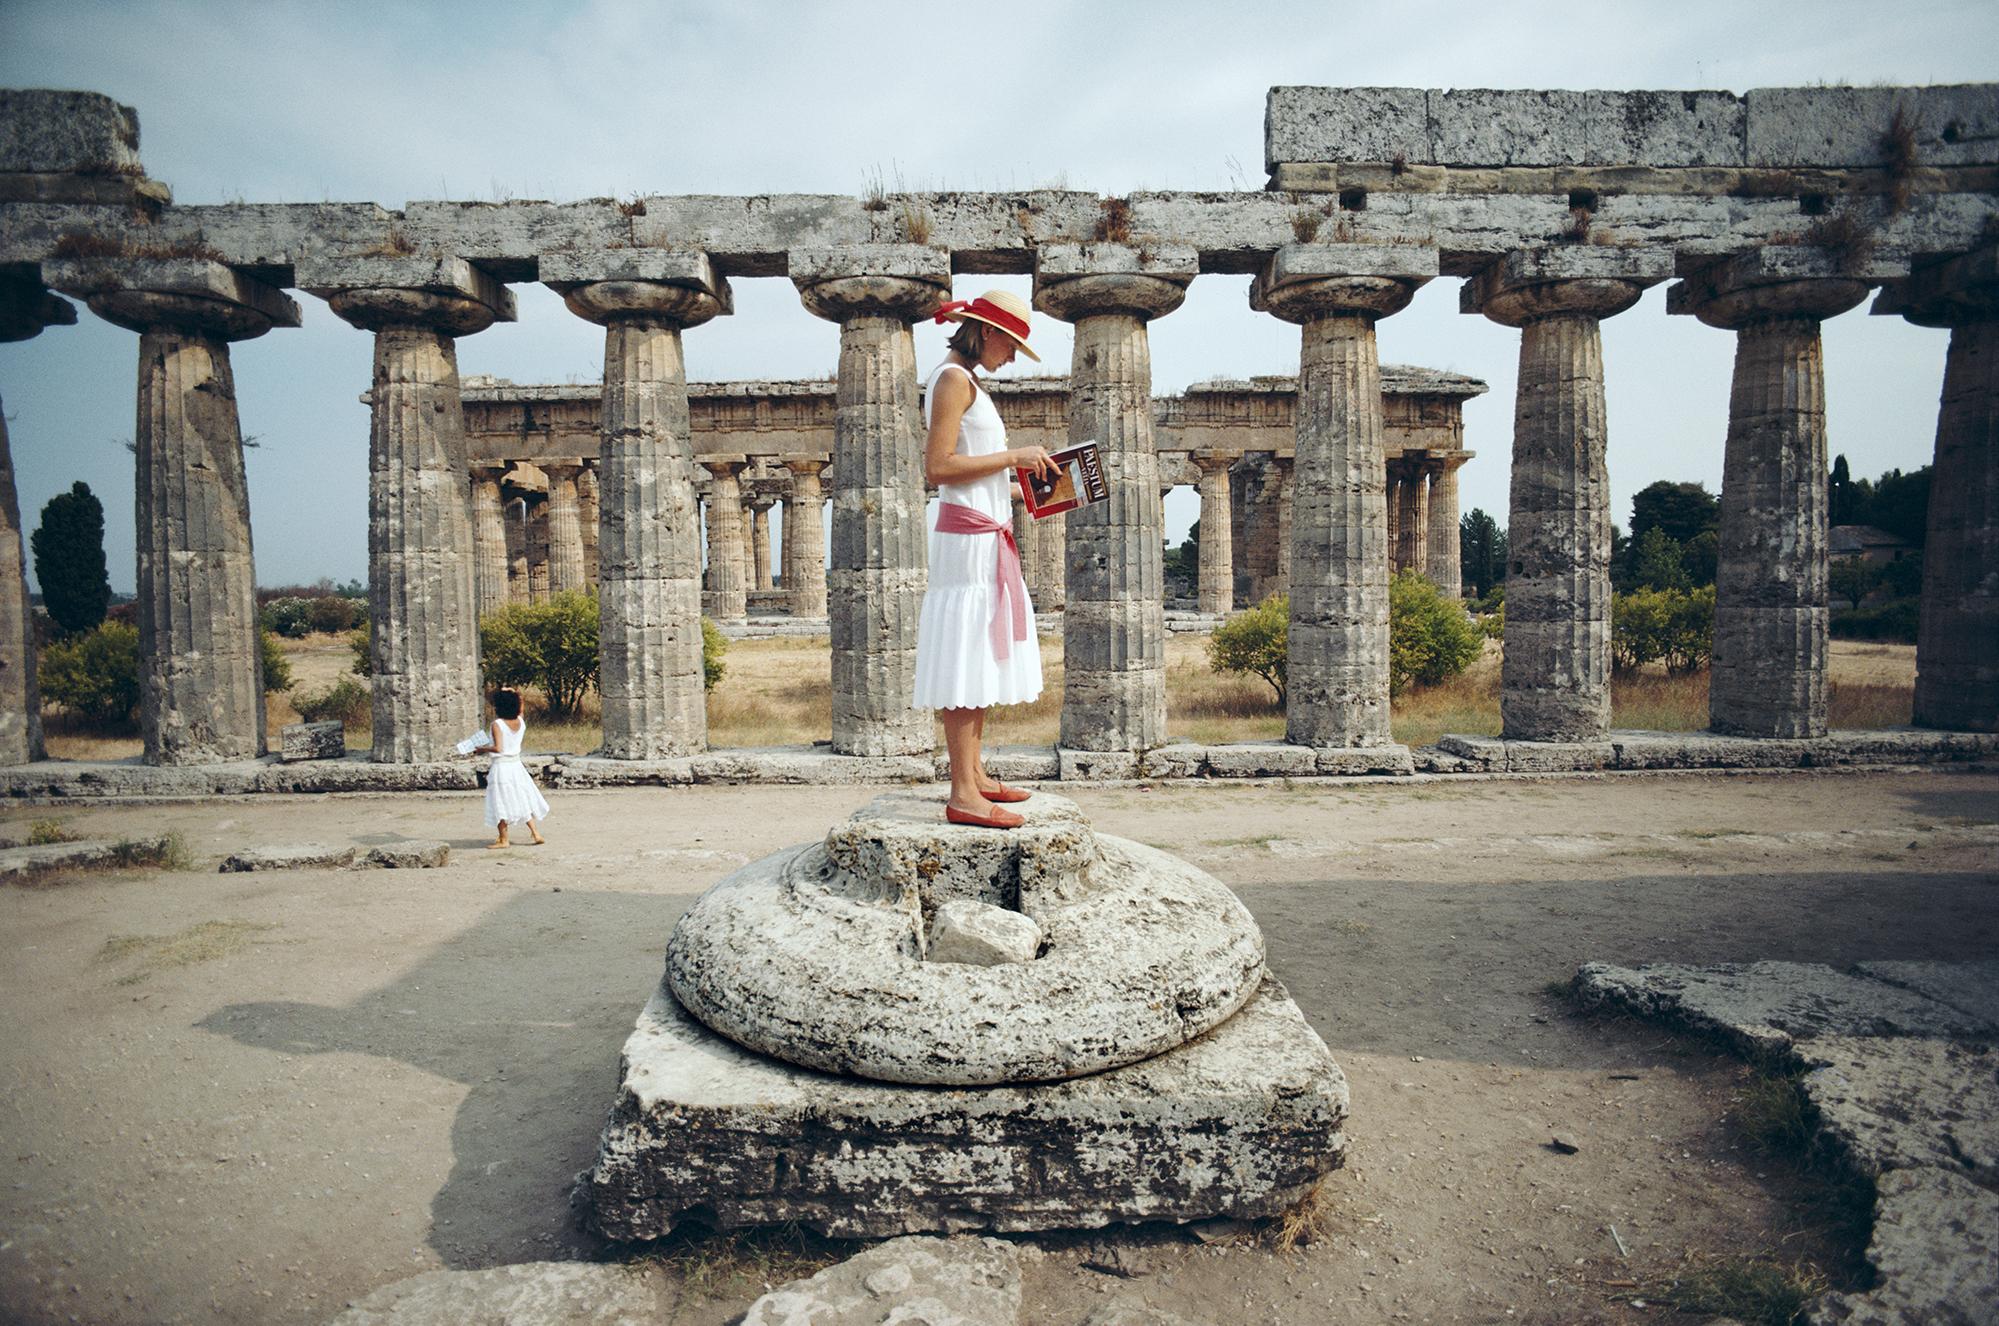 Laura Hawk
1984
C print
Estate signature stamped and hand numbered edition of 150 with certificate of authenticity from the estate. 

Laura Hawk amid the ancient greek ruins of Paestum on the Gulf of Salerno, 1984

Slim Aarons, an acclaimed fine art